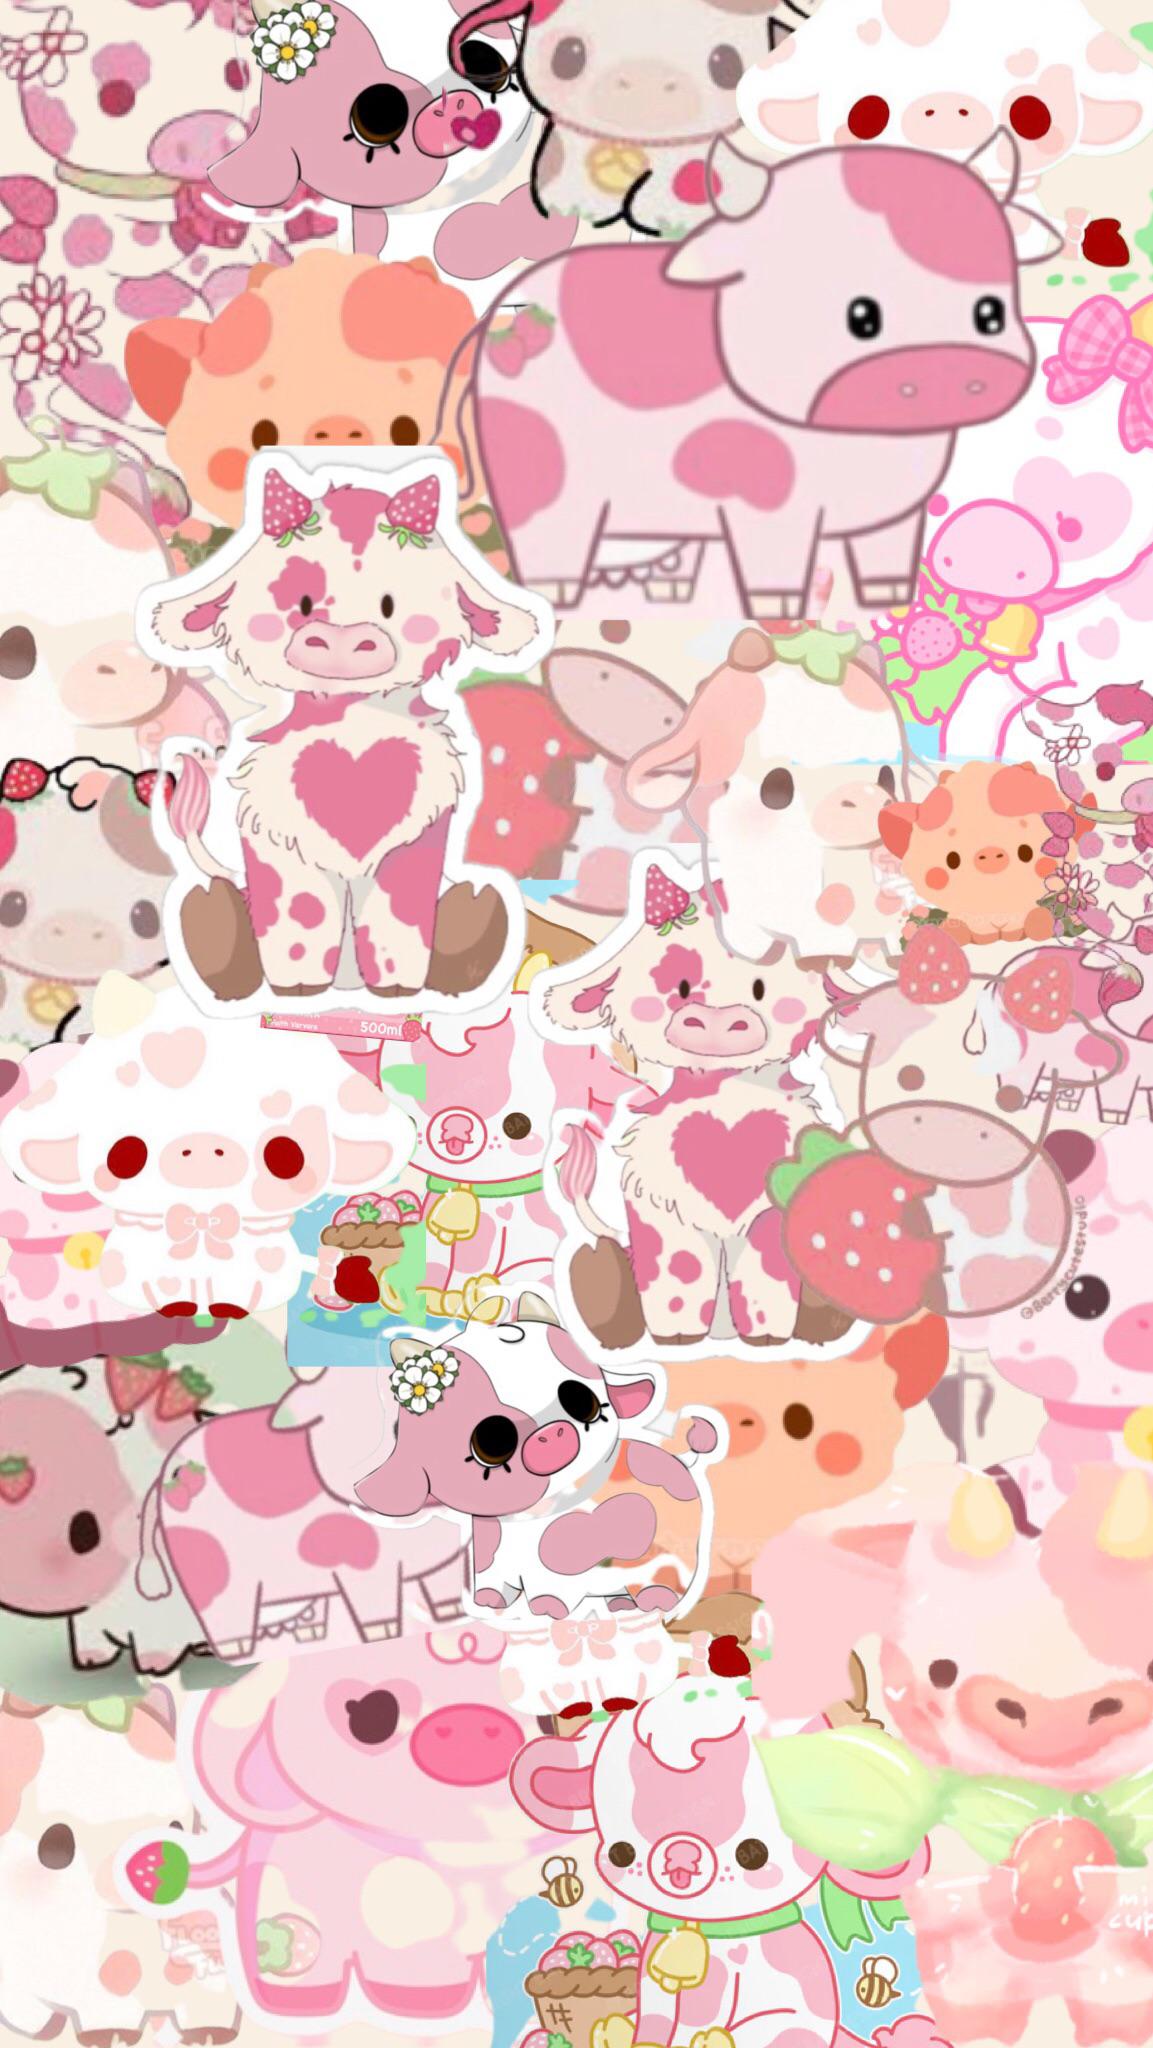 Strawberry cow wallpaper made